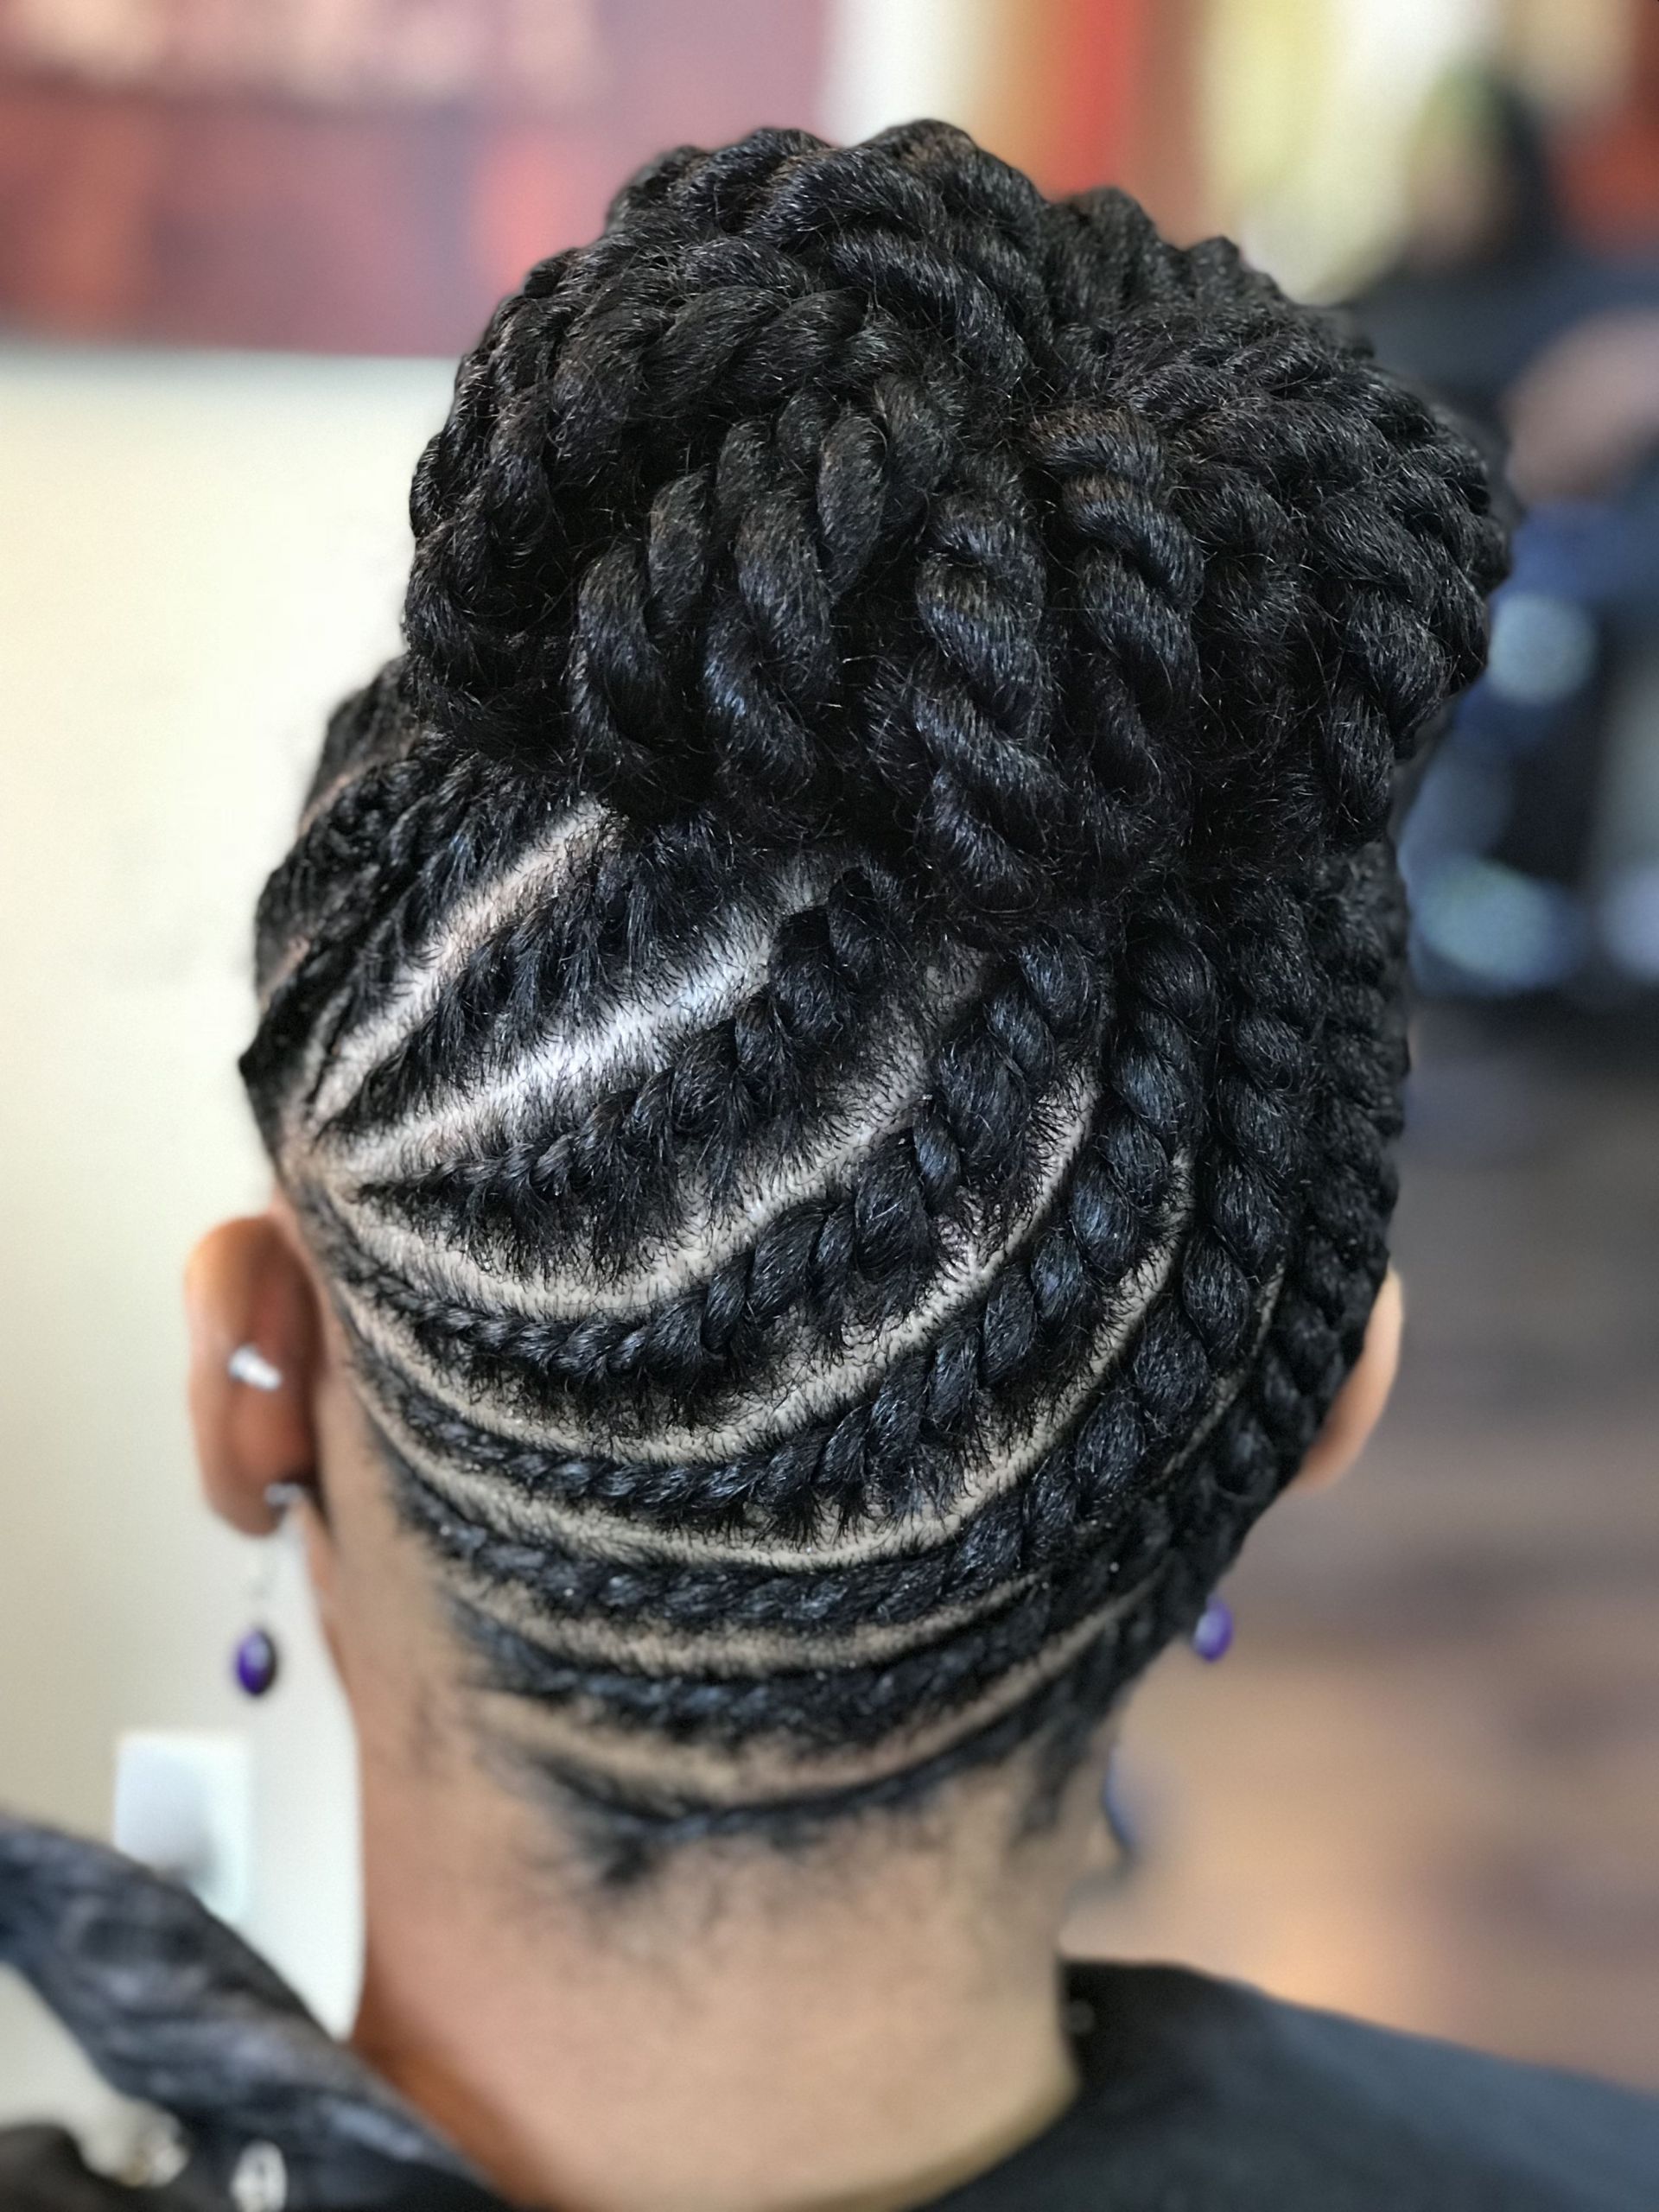 Braid Updo Hairstyles For Black Hair
 Twisted updo Hair Styles in 2019